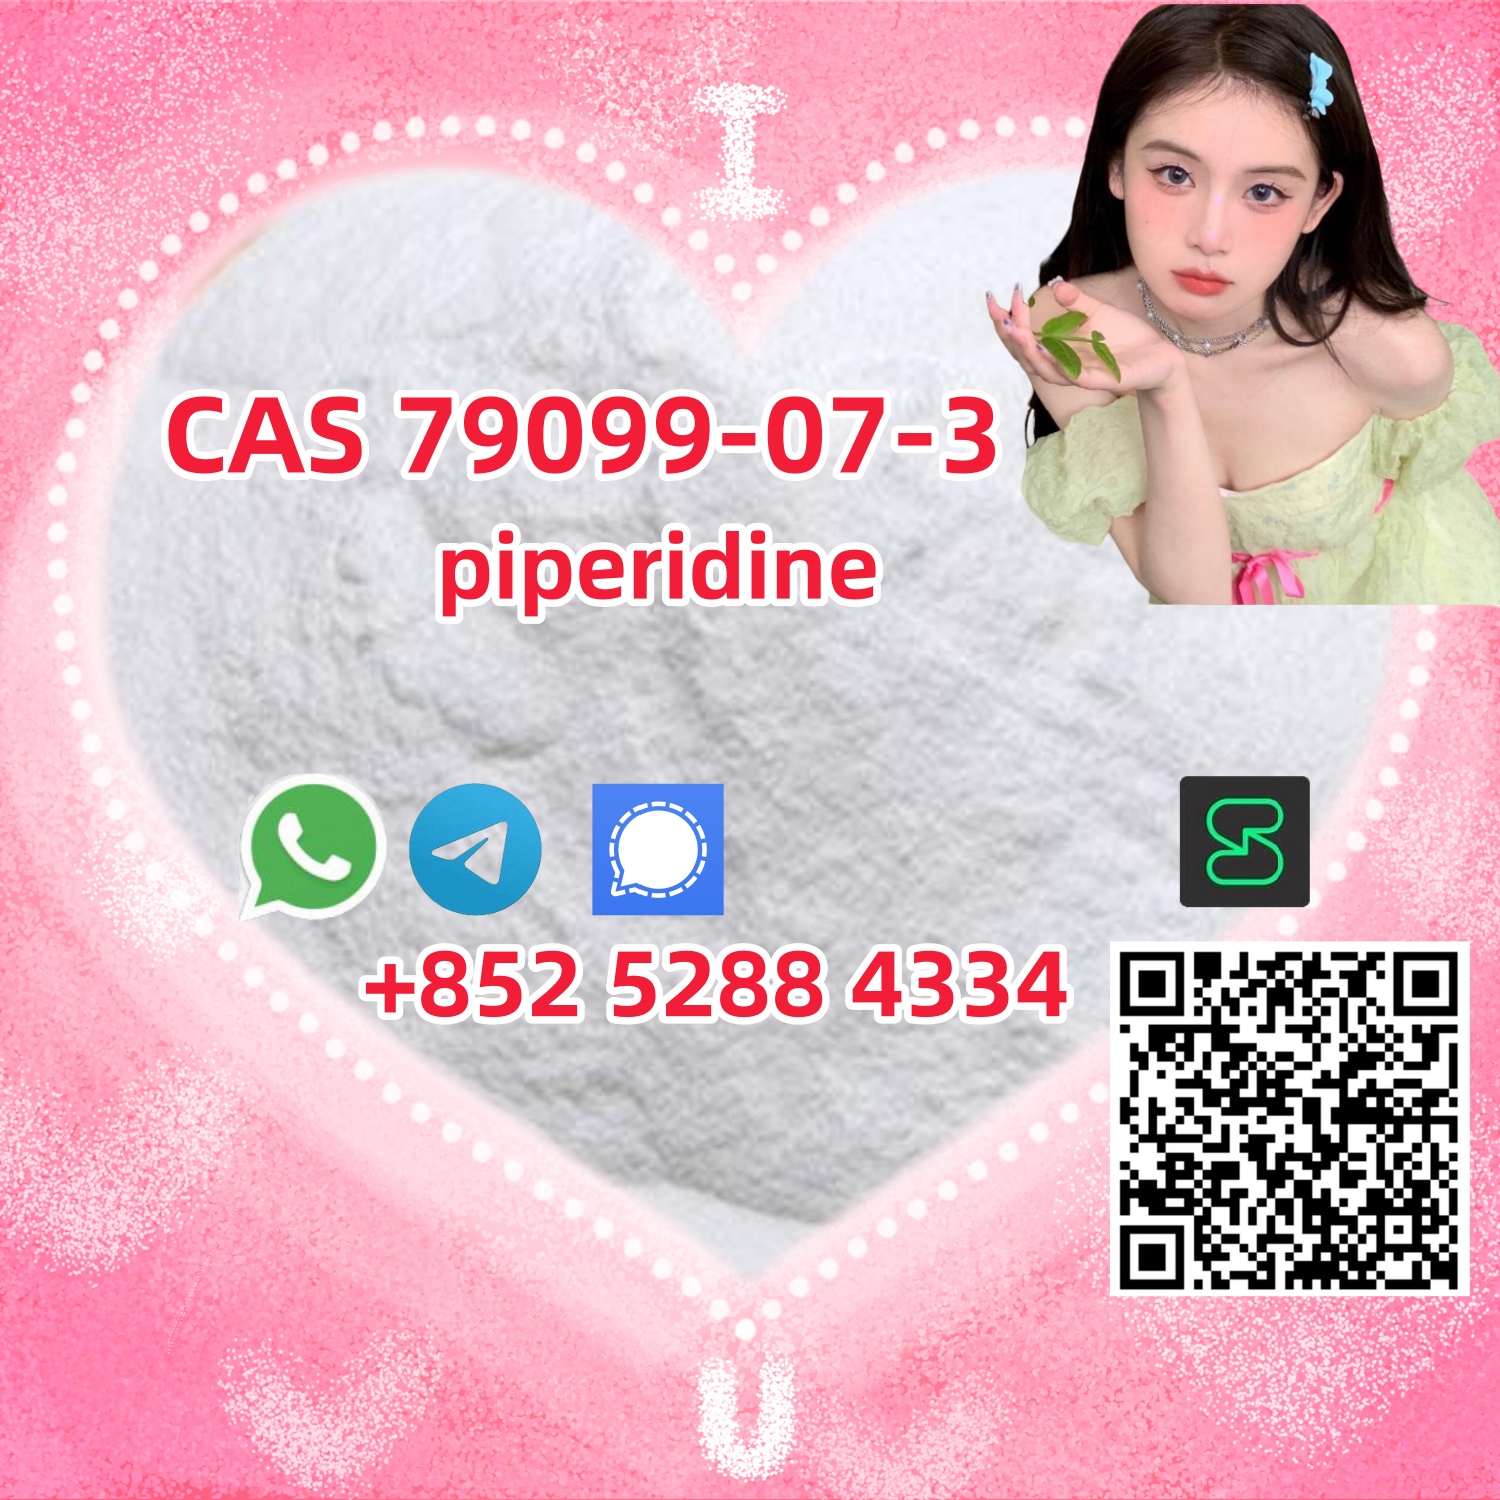 Hot Sell piperidine raw powder CAS 79099-07-3,aaaaa,Others,Services,77traders